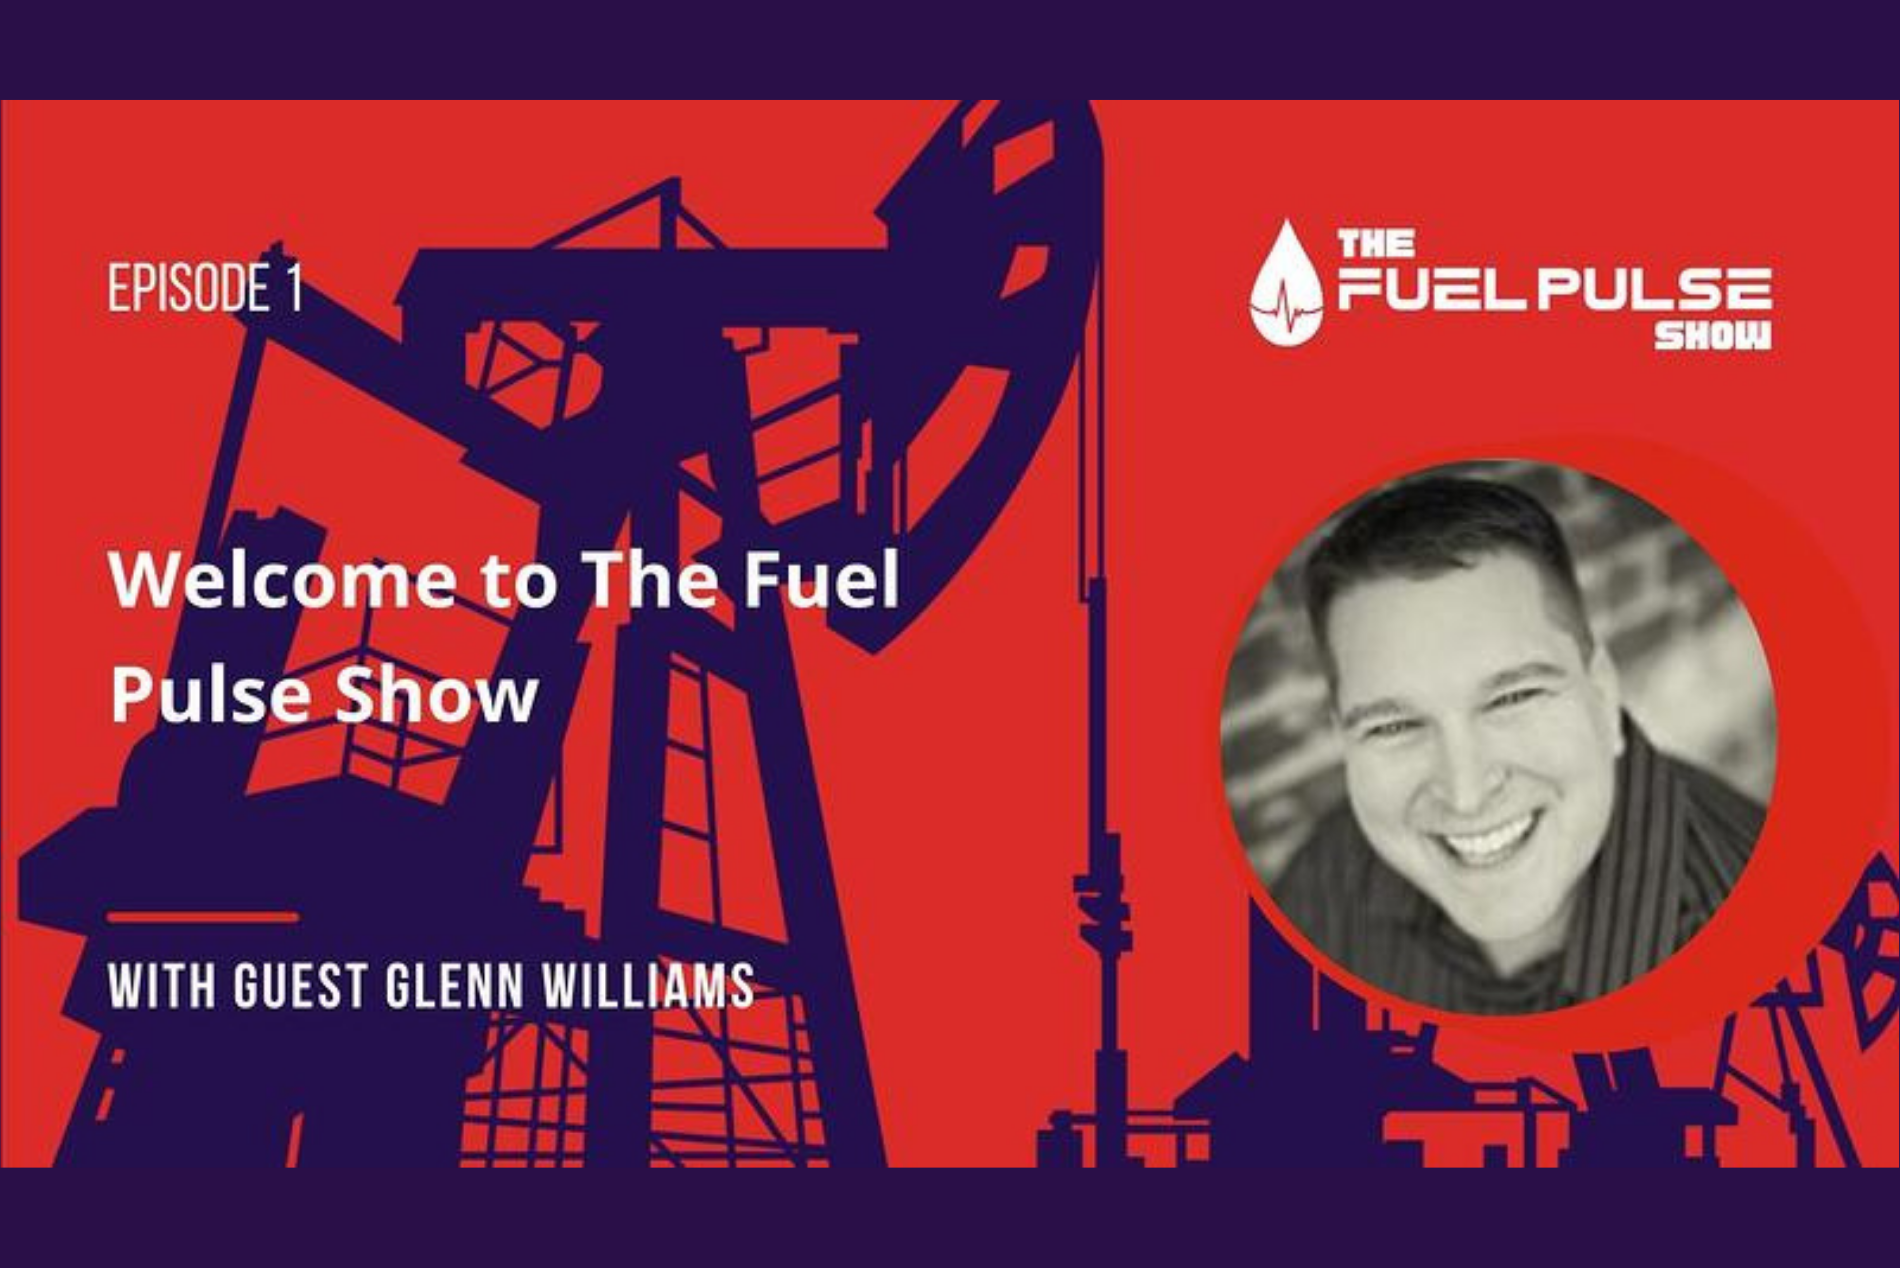 Episode 001 - Welcome to The Fuel Pulse Show with Glenn Williams